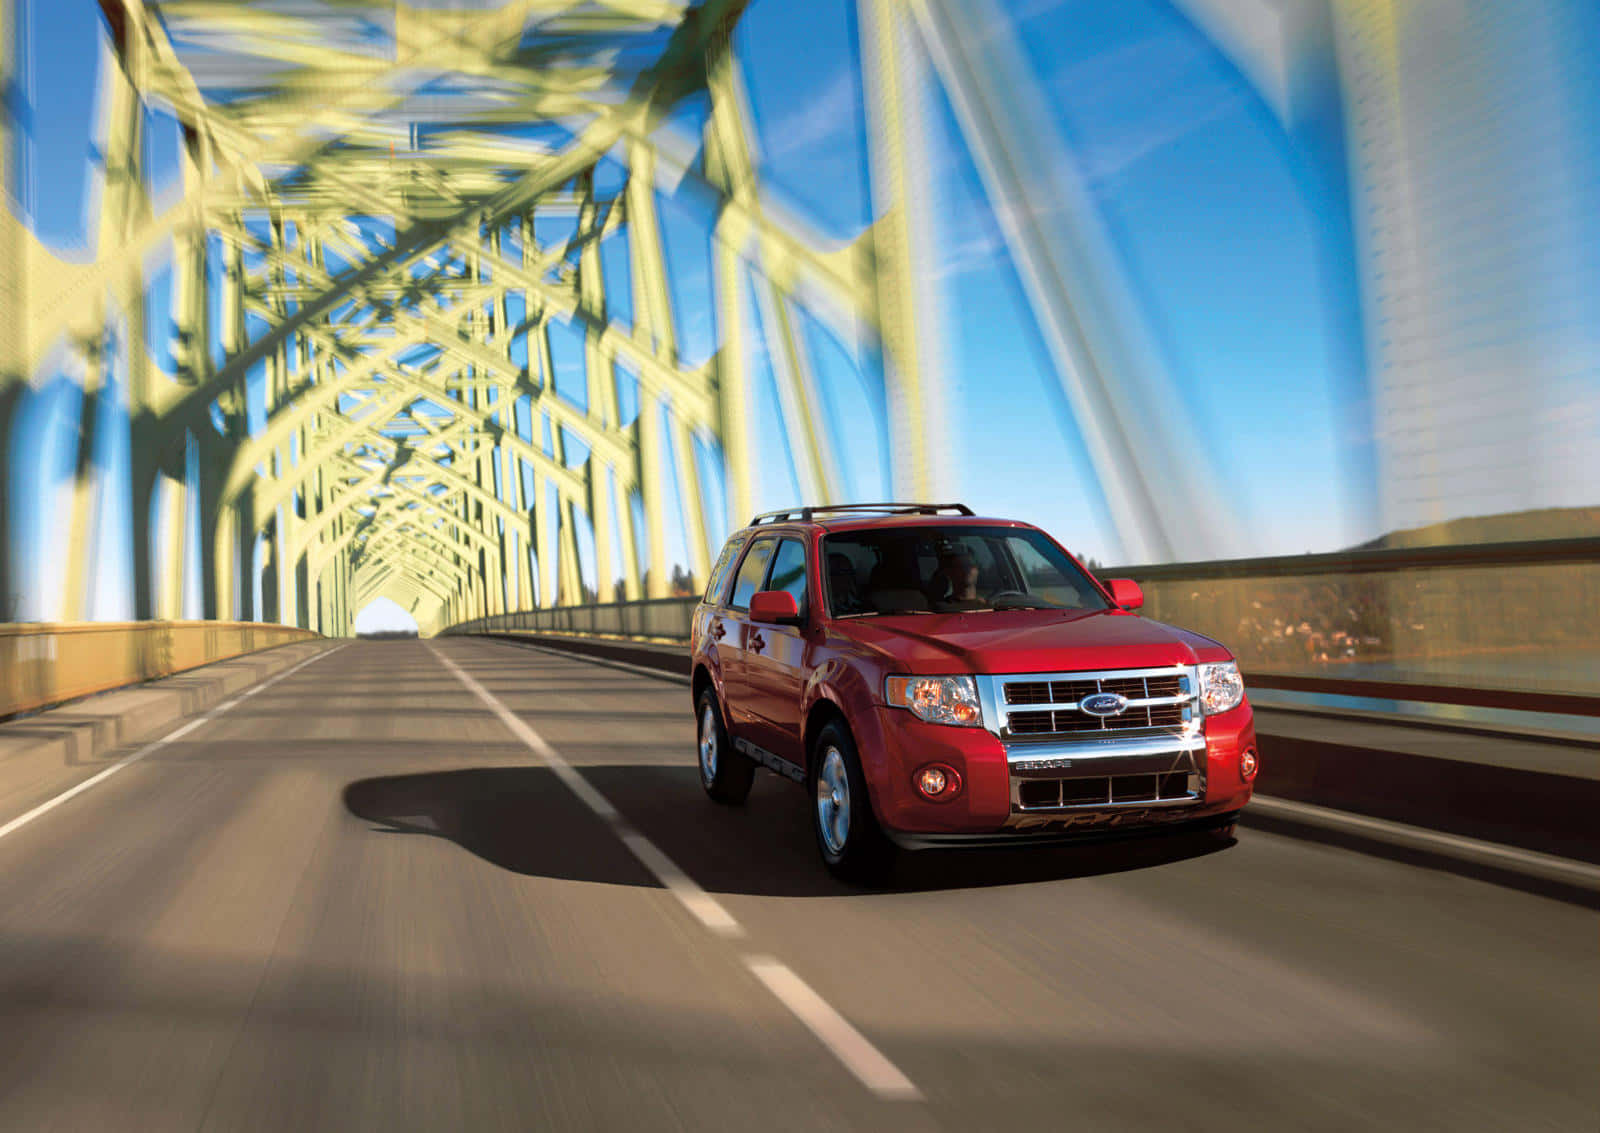 Sleek Ford Escape on a Scenic Drive Wallpaper